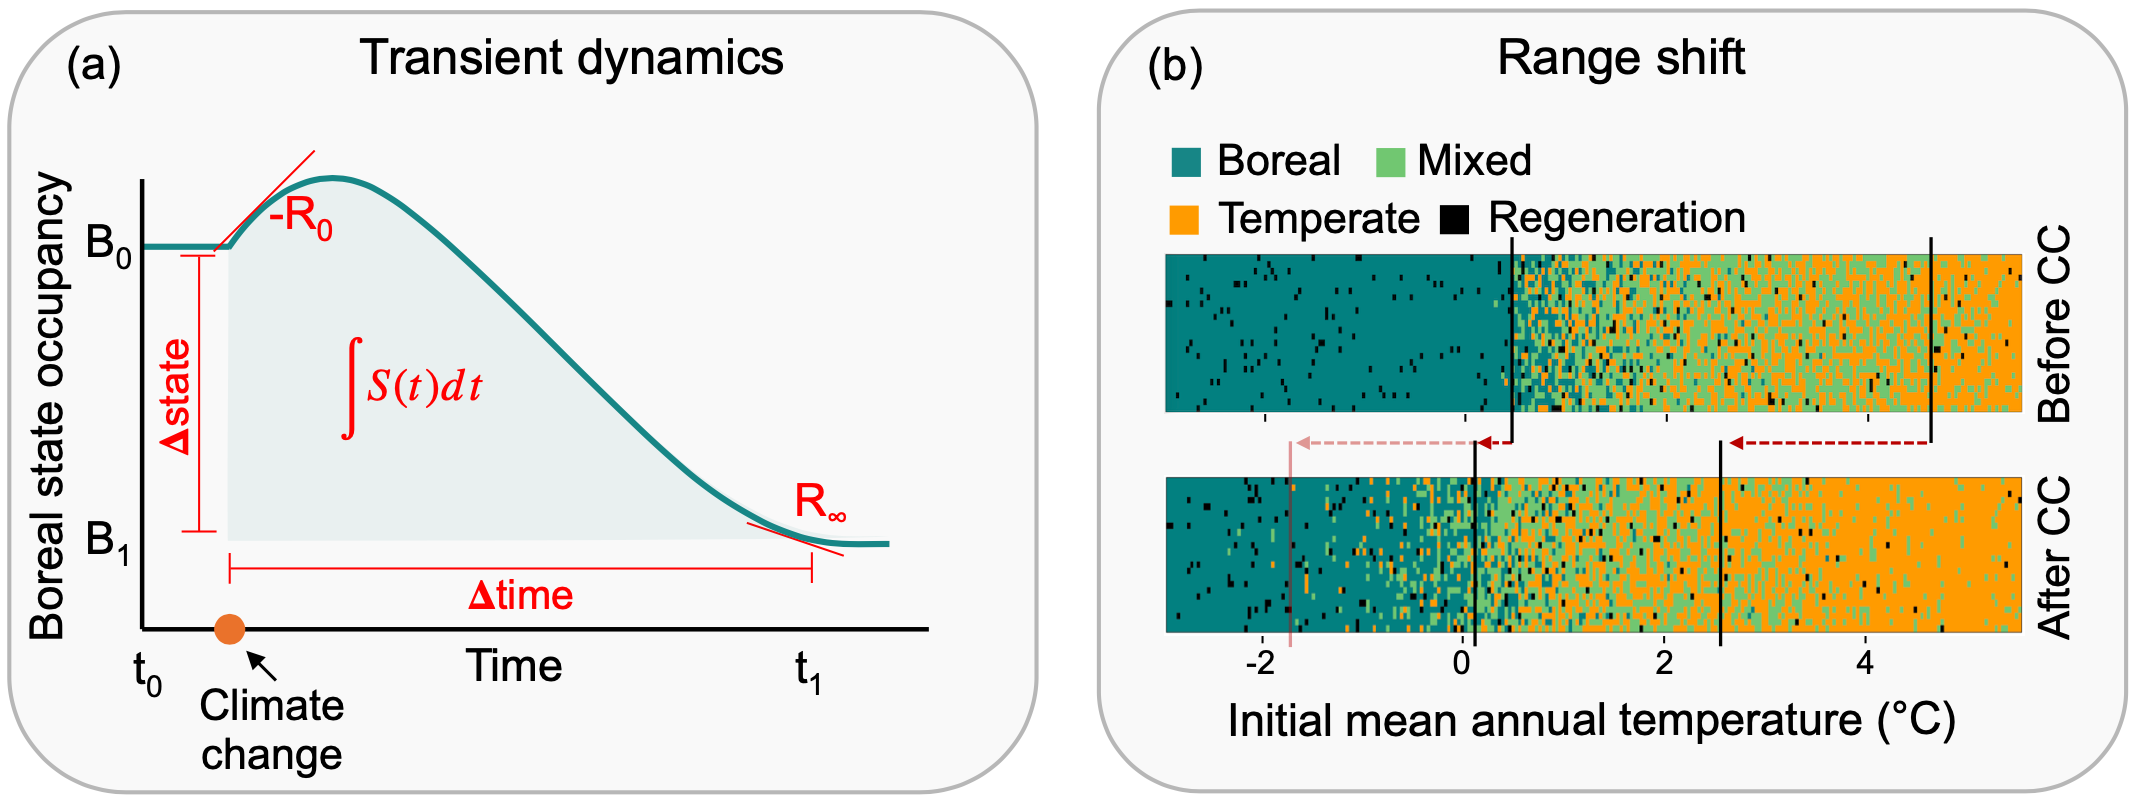 Figure 1: Conceptual schema of the two approaches used to test the effect of forest management on the response of forest to temperature increases. (a) Redrawn from Boulangeat et al. (2018). The spatially implicit version of the model was used to investigate how forest management affects the transient dynamics following temperature increases. Take, for instance, a patch with environmental conditions that mainly favour boreal species, the increase in temperature due to climate change will now favour other species over the boreal ones. As a result, the boreal state occupancy at equilibrium under the new climate (B_1 at t_1) will be lower than it was before climate change (B_0 at t_0). Five metrics can describe the transient phase between the old and new equilibrium: initial resilience (-R_0), asymptotic resilience (R_{\infty}), exposure (\Delta_{state}), sensitivity (\Delta_{time}) and cumulative amount of changes (\int S(t)dt). (b) The spatially explicit version of the model was used to study the effect of forest management on the range shift of forest states following climate change (CC) while accounting for limited dispersal of trees and stochastic dynamics. The two lattice grids represent the distribution of pure boreal, mixed, pure temperate, and regeneration states along a gradient of temperature ranging from boreal dominant to temperate dominant climate conditions. The cell size of the grids in this figure was increased for visual clarity. The left and right vertical black bars indicate the range limit between boreal and mixed, and between mixed and temperate, respectively. The upper lattice shows the distribution of forest states in equilibrium with climate before the increase in temperature (initial state). The bottom lattice shows, according to Vissault et al. (2020), that after 150 years following the increase in temperature, the mixed/temperate range limit followed climate change (red arrow), but the boreal/mixed range limit did not (faded red arrow). We use this scenario to study the potential of forest management to accelerate the range shift of the boreal-temperate ecotone towards colder temperatures.